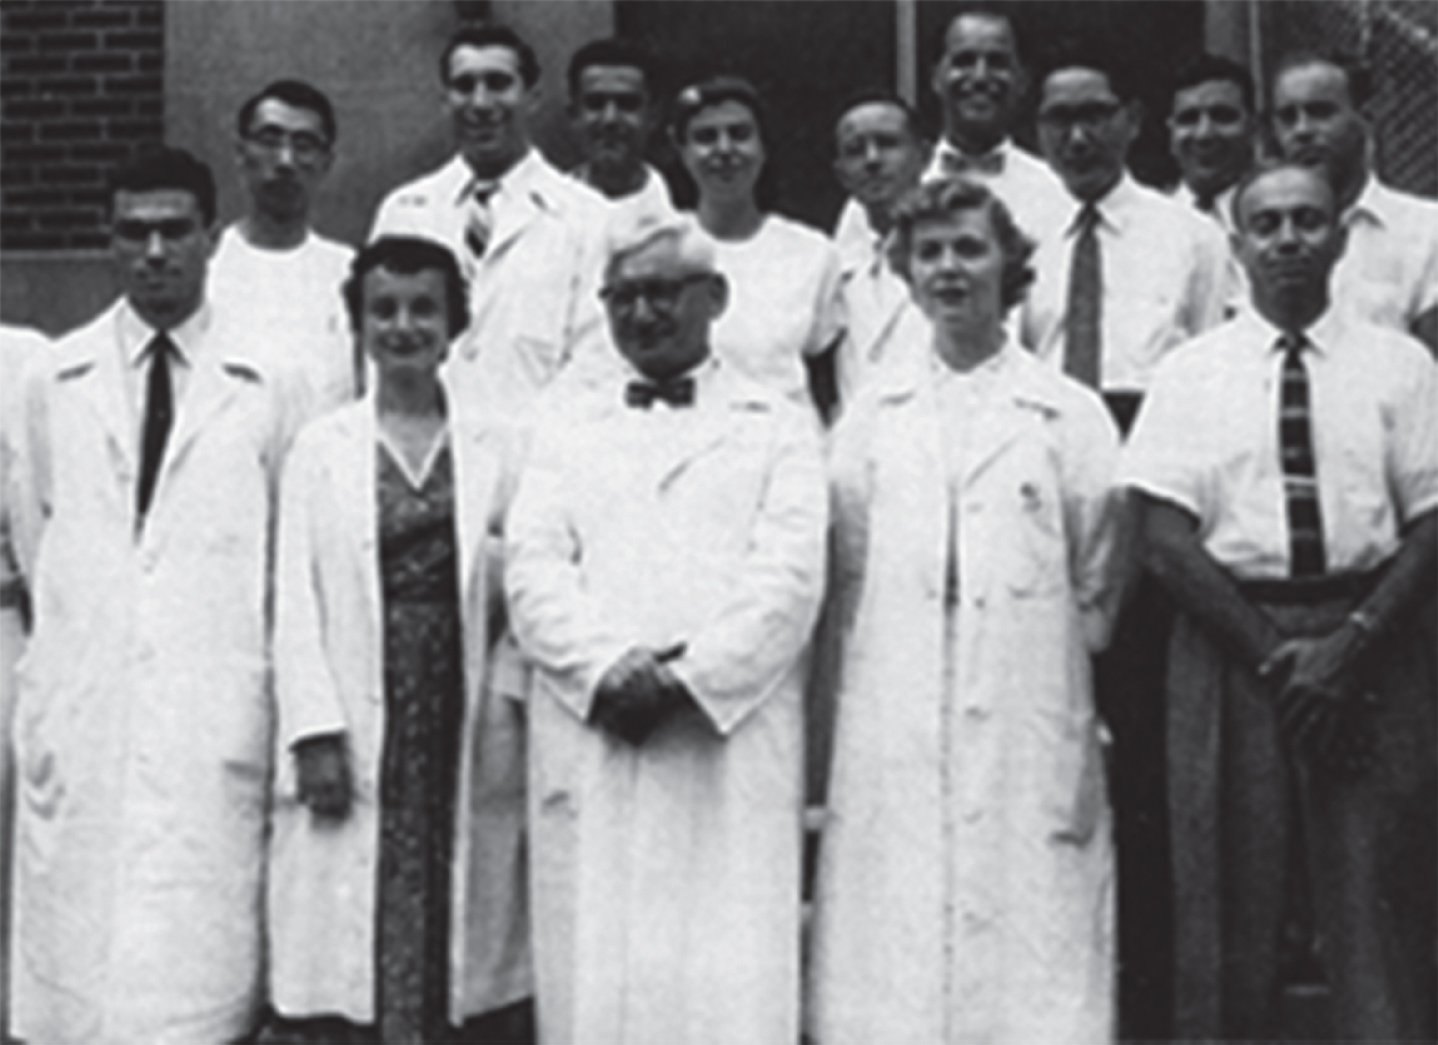 The Neuropathology group at the Montefiore Hospital in the 1950s. Front row (L to R): Bob Terry, Hilda Laufer, Harry Zimmerman, and Lucretia Allen. Back row: Asao Hirano, Nick Gonatas, Kleo Siderides, and Robert Belsky.